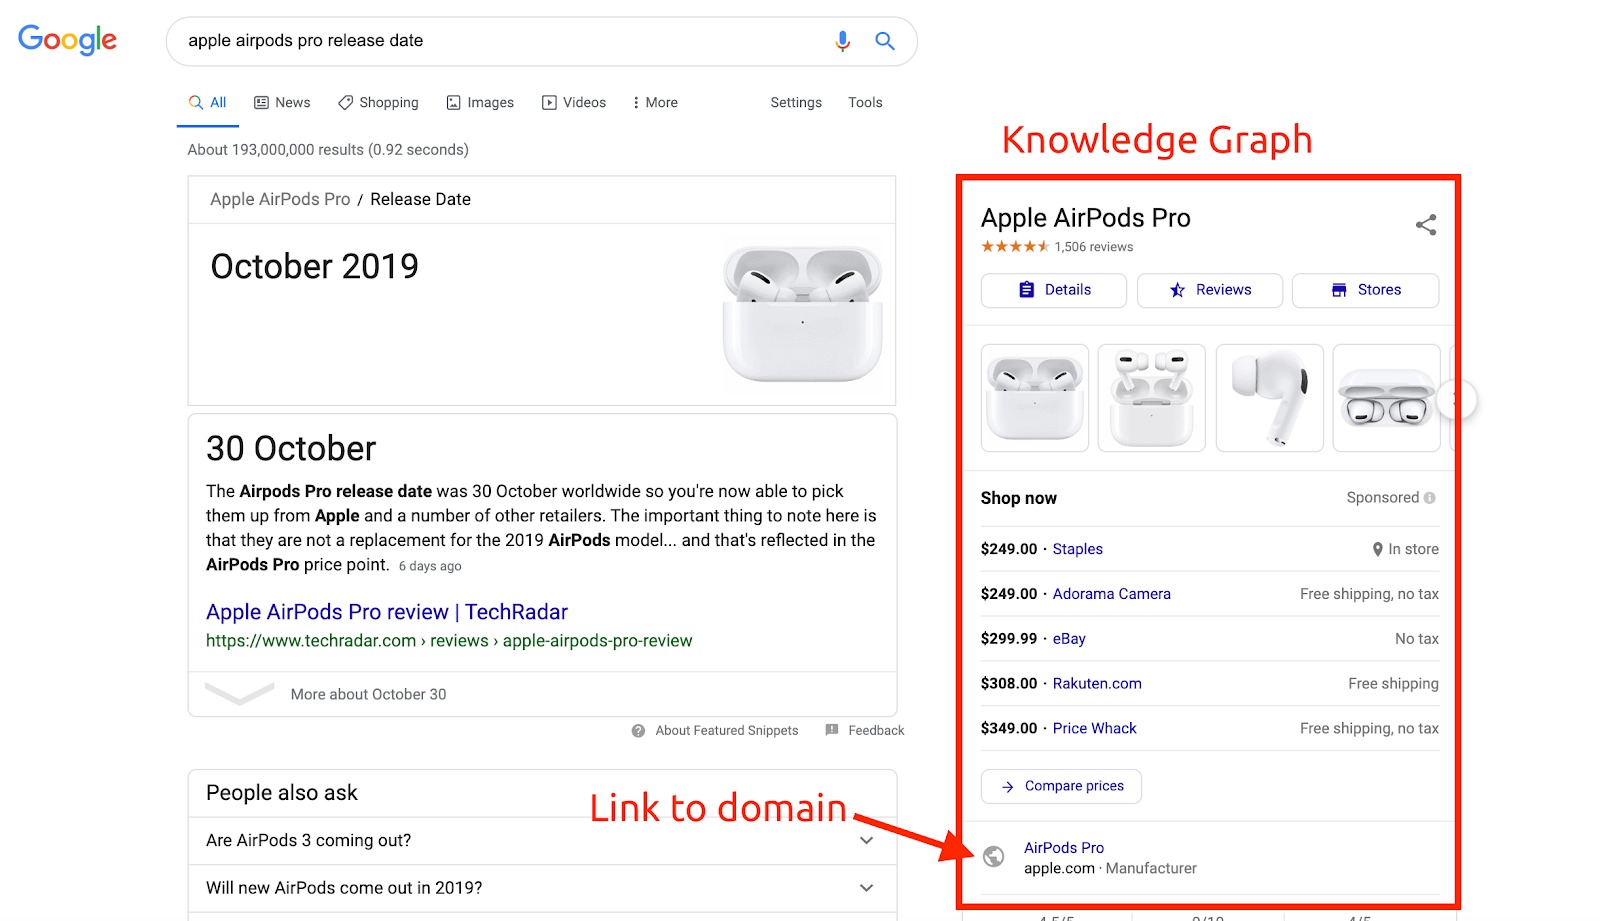 Example of what Knowledge Graph for Airpods looks like. This SERP Feature is on the left side of this screenshot and is highlighted with red. Above it, the text says "Knowledge Graph". Another text, "Link to domain", is located at the very bottom of the Knowledge Graph and is accompanied by an arrow pointing at the link to the Airpods manufacturer website.